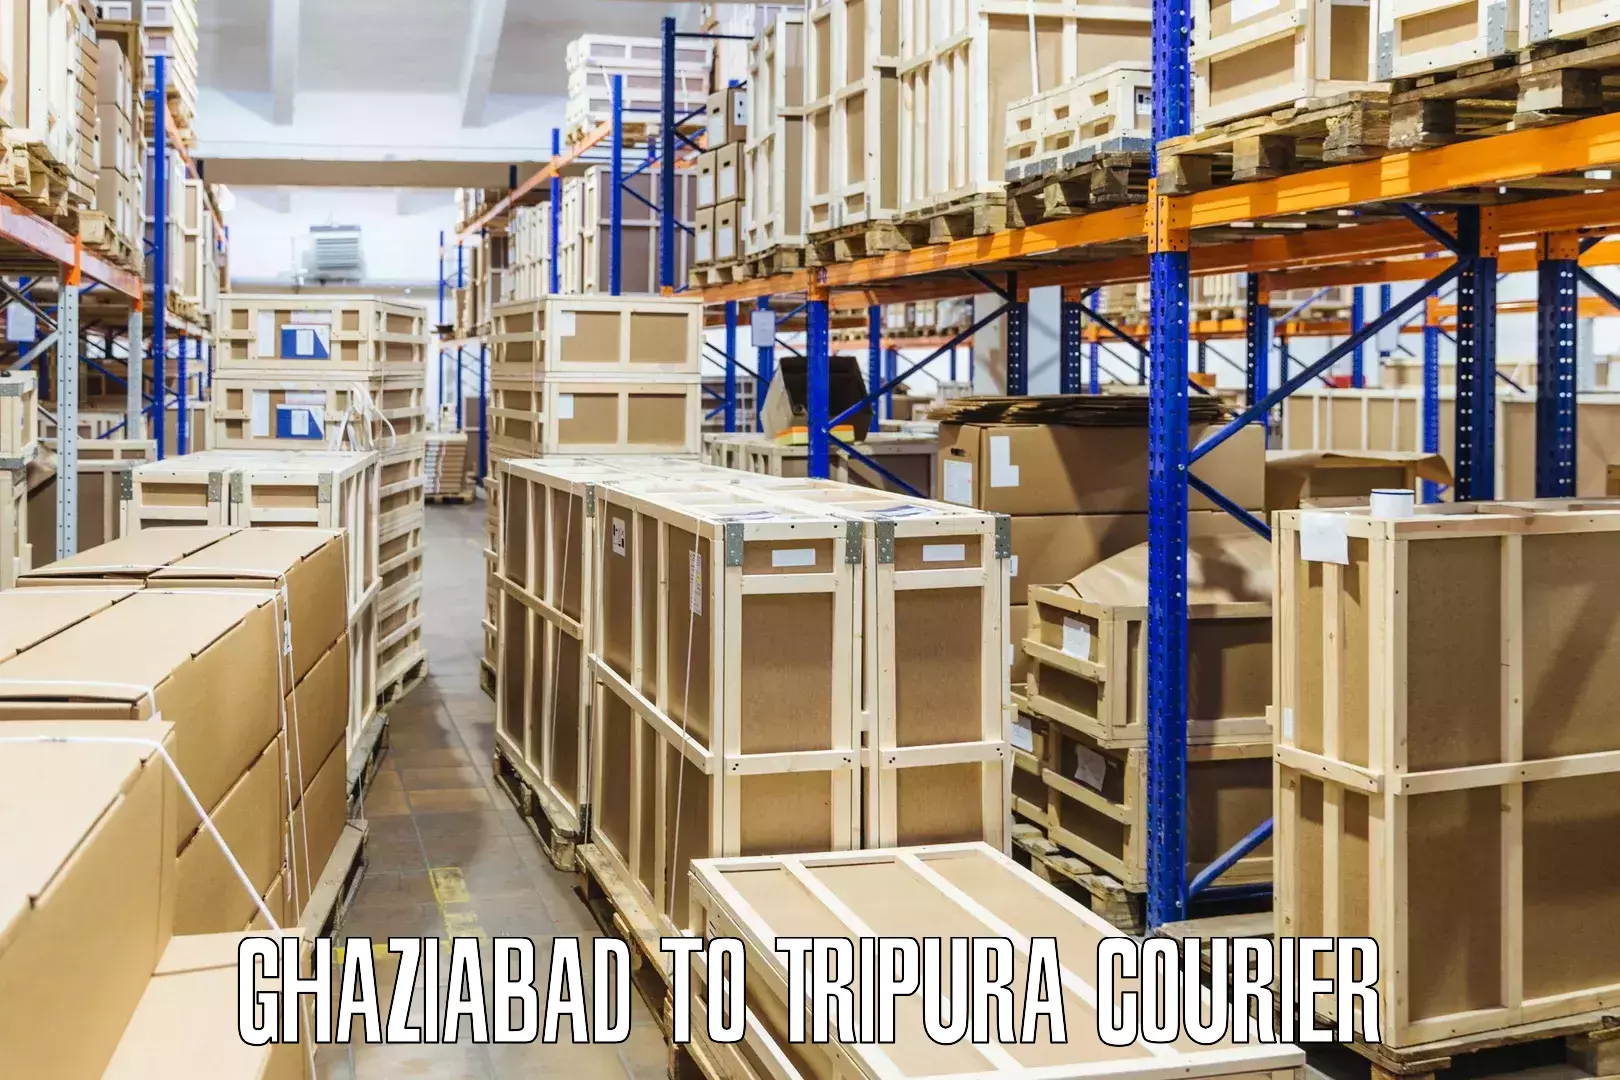 User-friendly courier app Ghaziabad to North Tripura